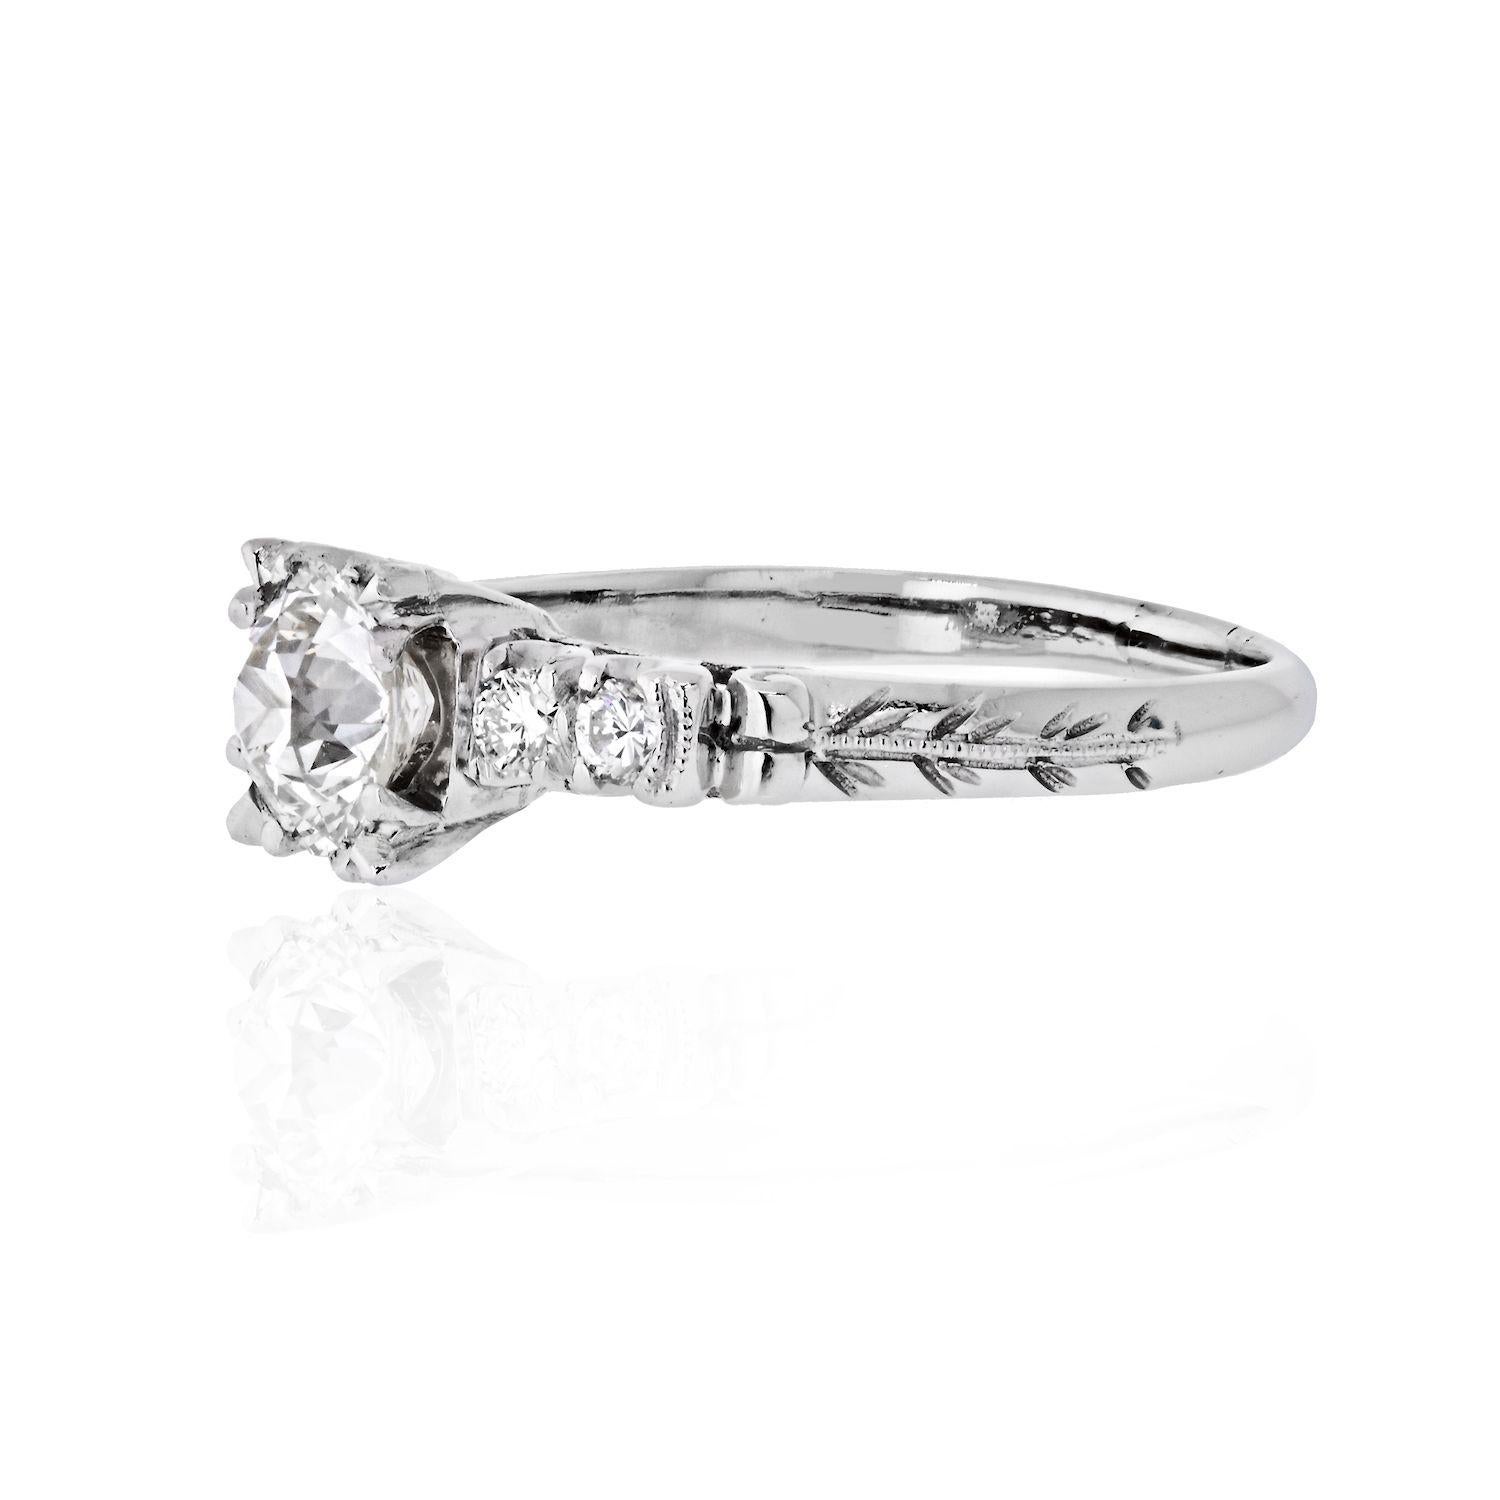 This is a beautiful 1.03 carat Old European Cut diamodn engagement ring. Center diamond is GIA certified J color, VS2 clarity. The shank of the ring is accented by round cut diamonds of an approx. 0.10cts. and vintage hand engraving.
